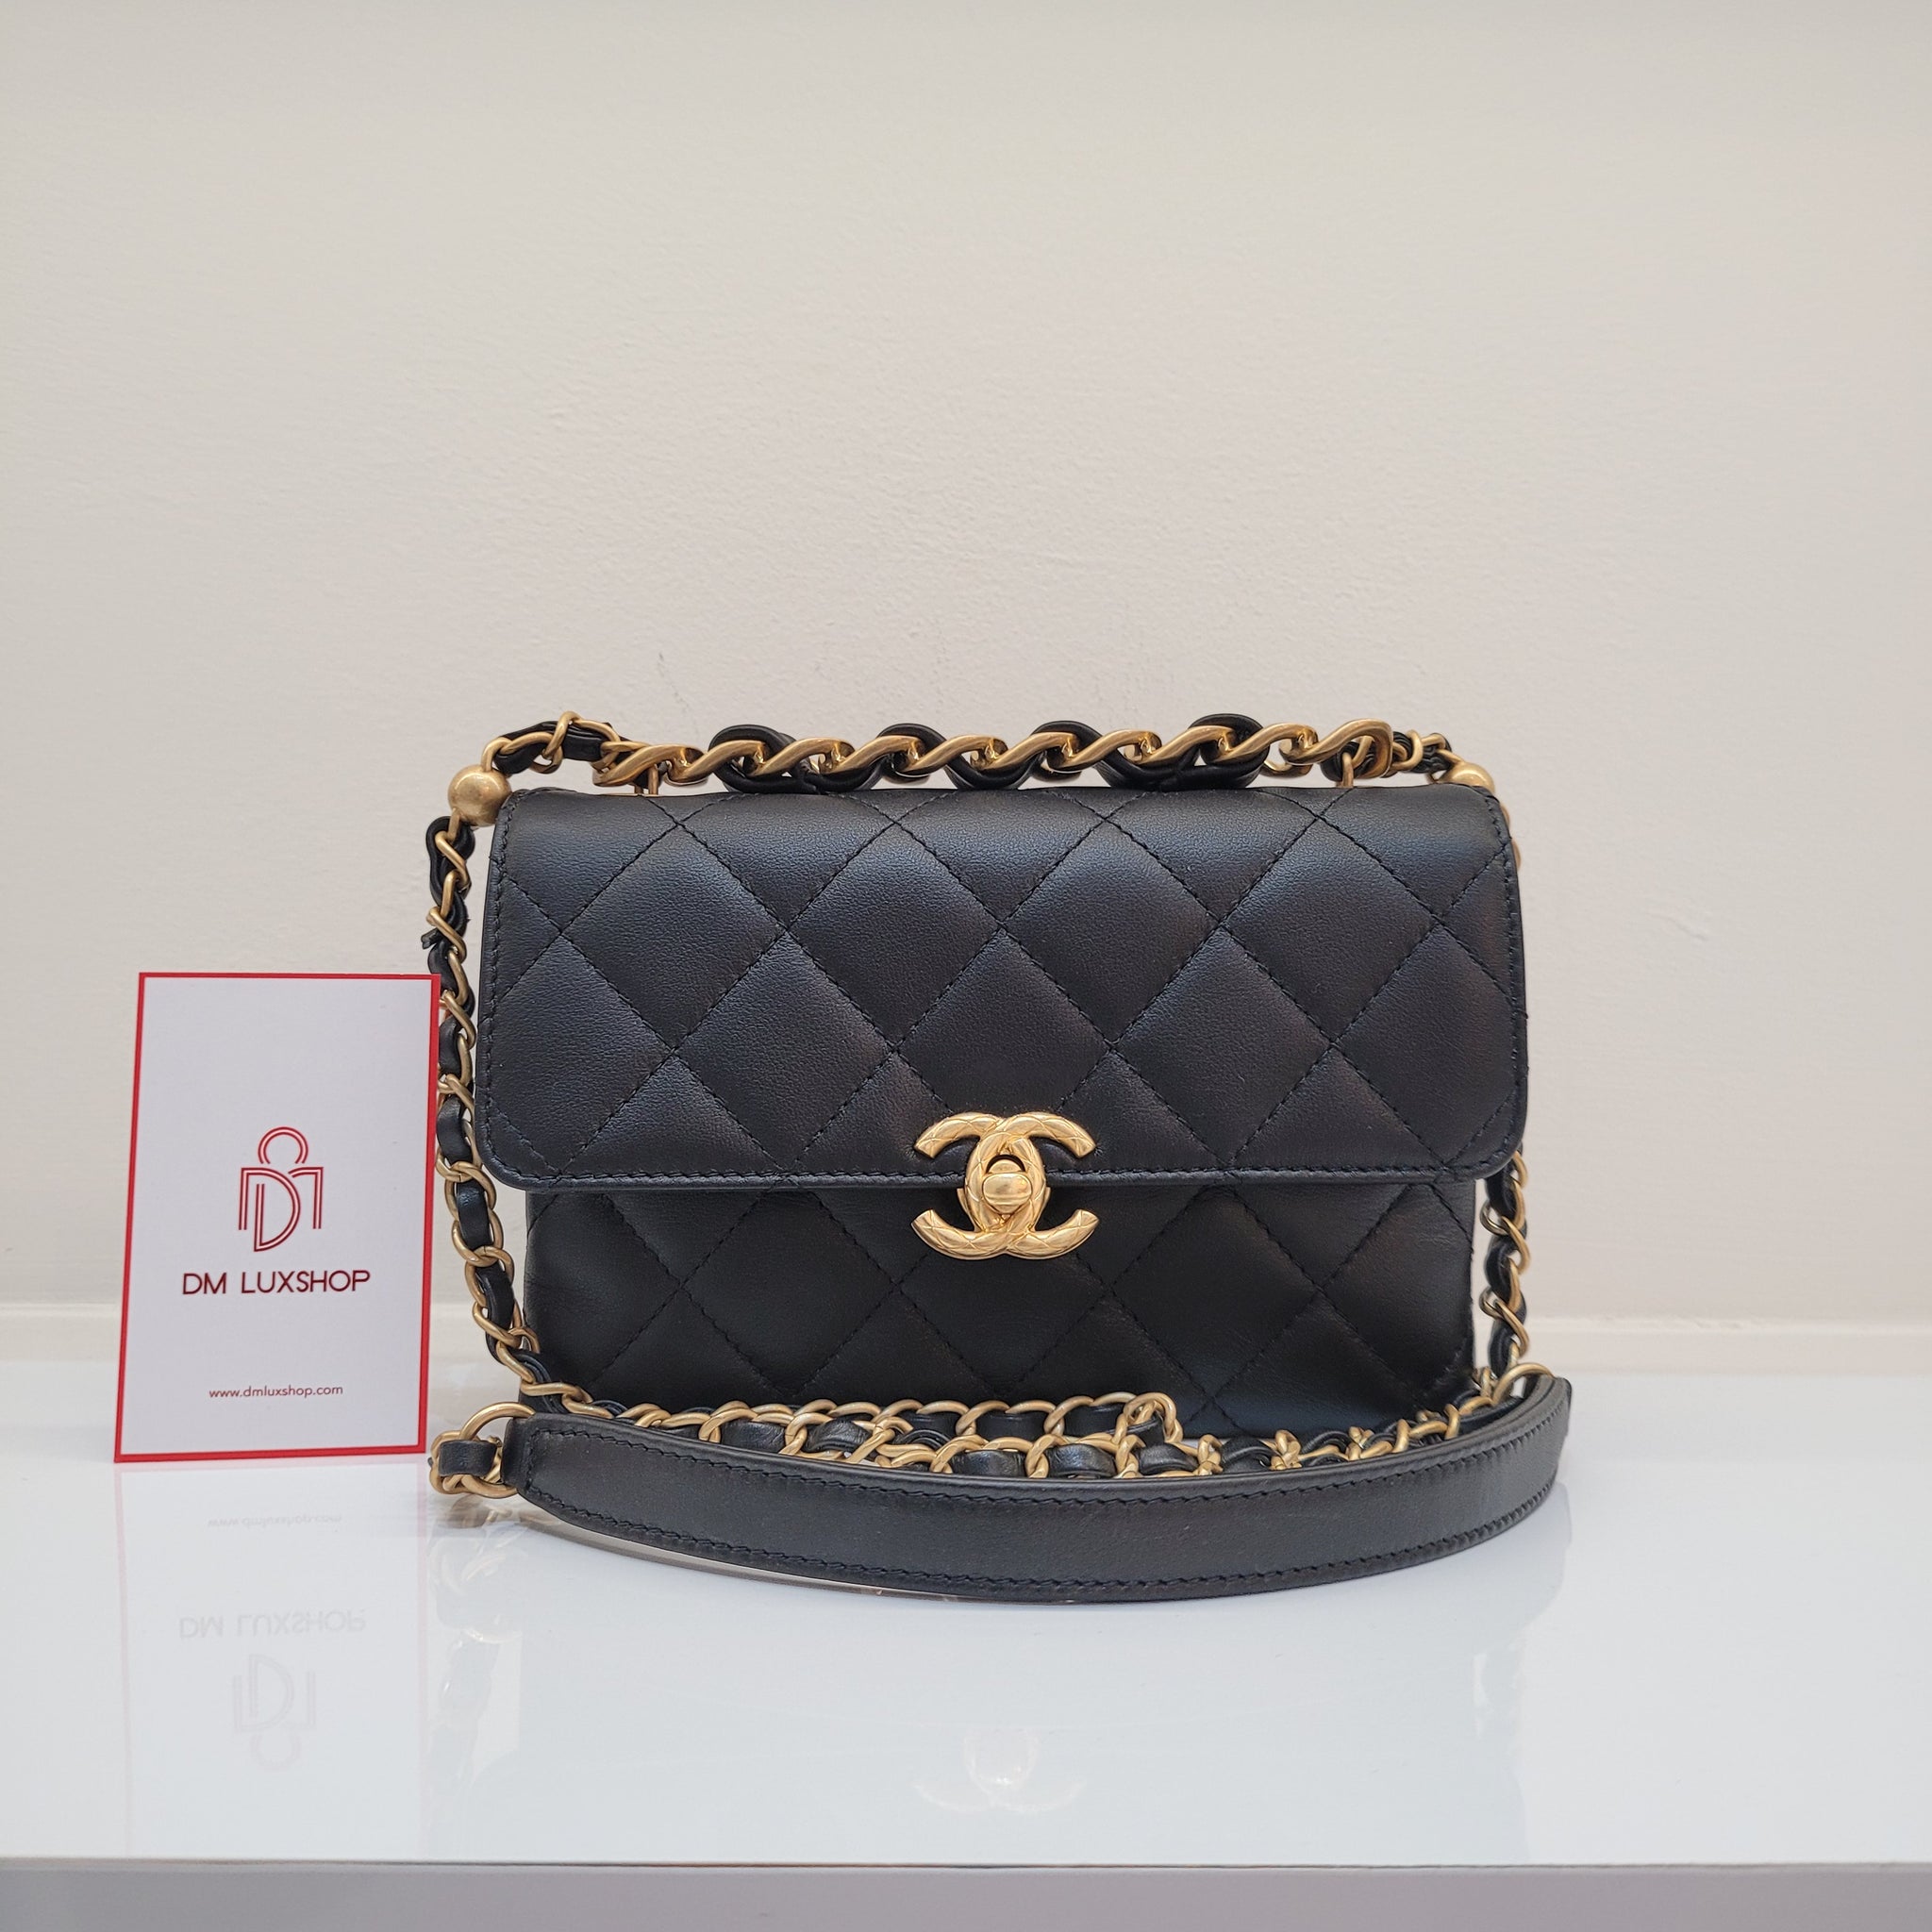 Chanel 22s Small Heart Bag in Pink Brand New orangeporter